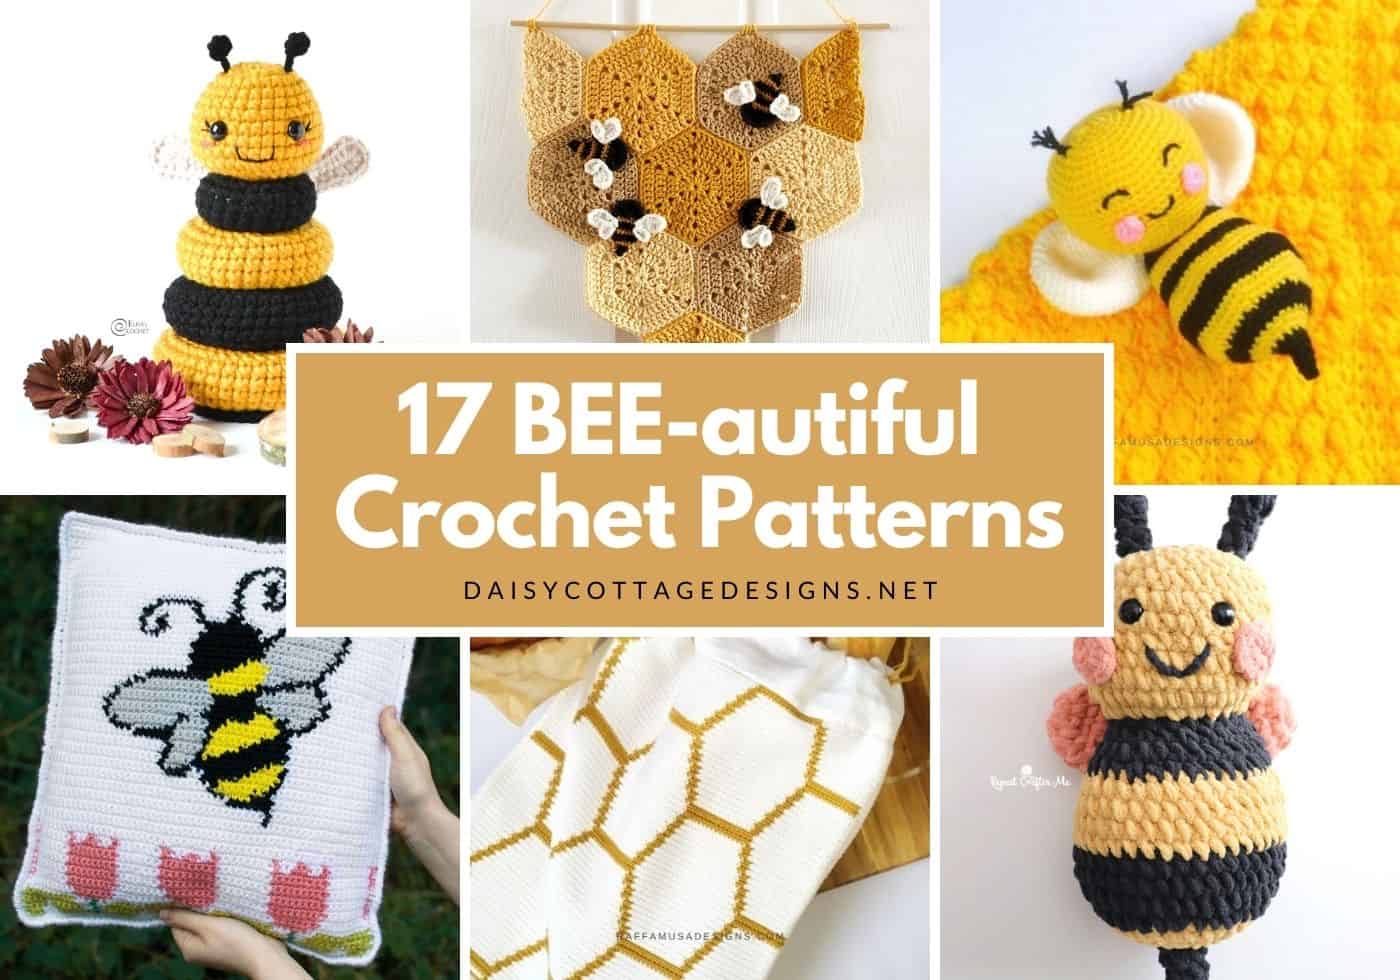 17 Easy Crochet Bee Patterns (Stuffies To Pillows!) - Daisy Cottage Designs